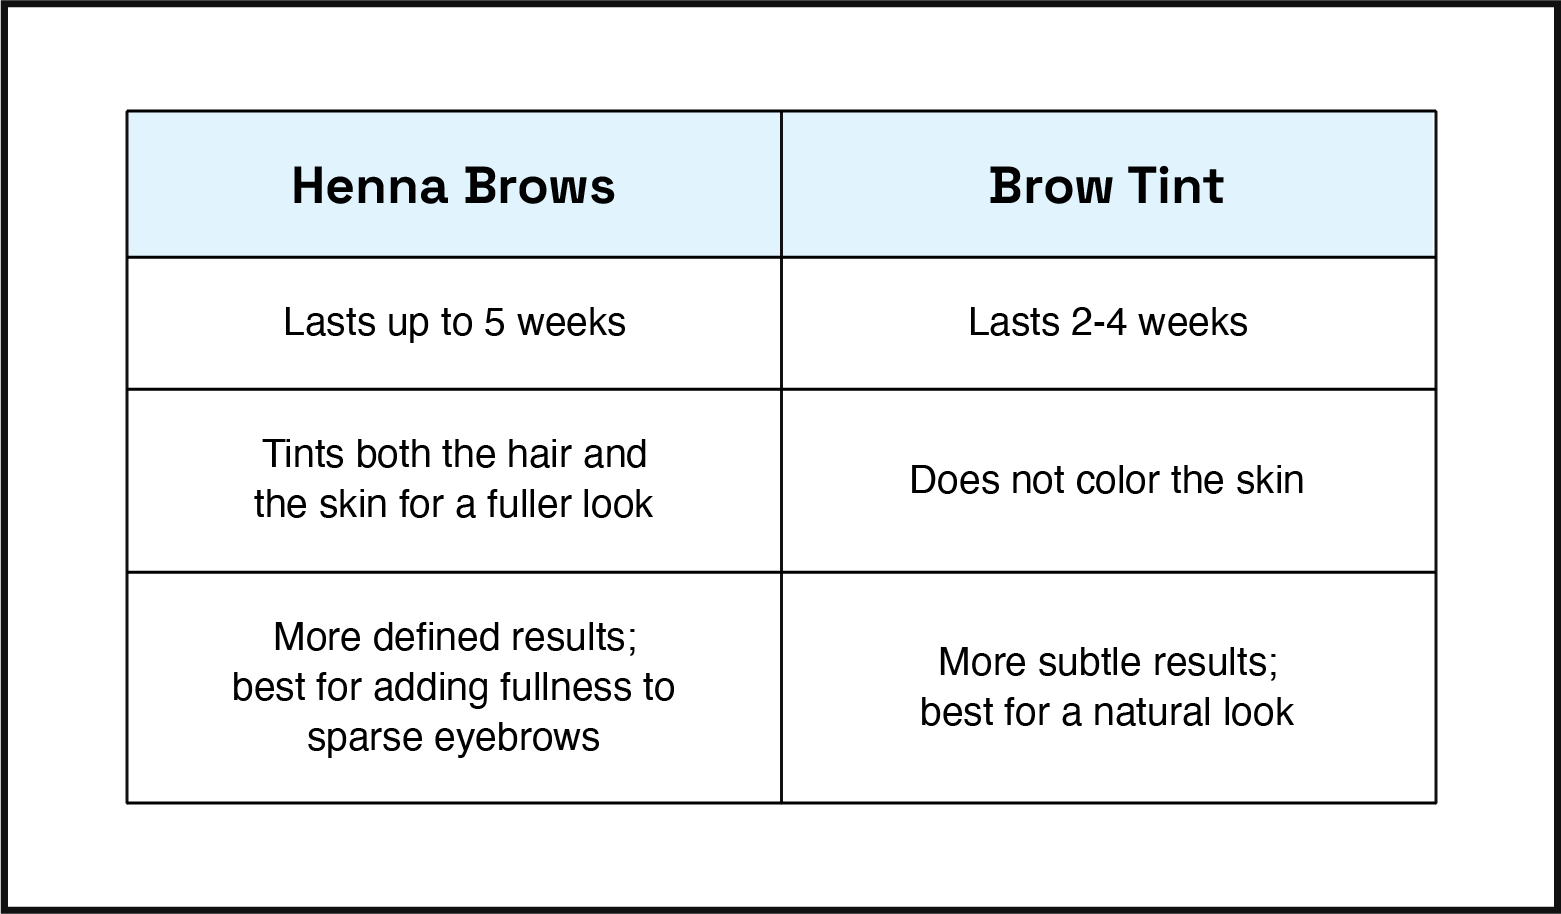 summary of differences between henna brows and brow tint